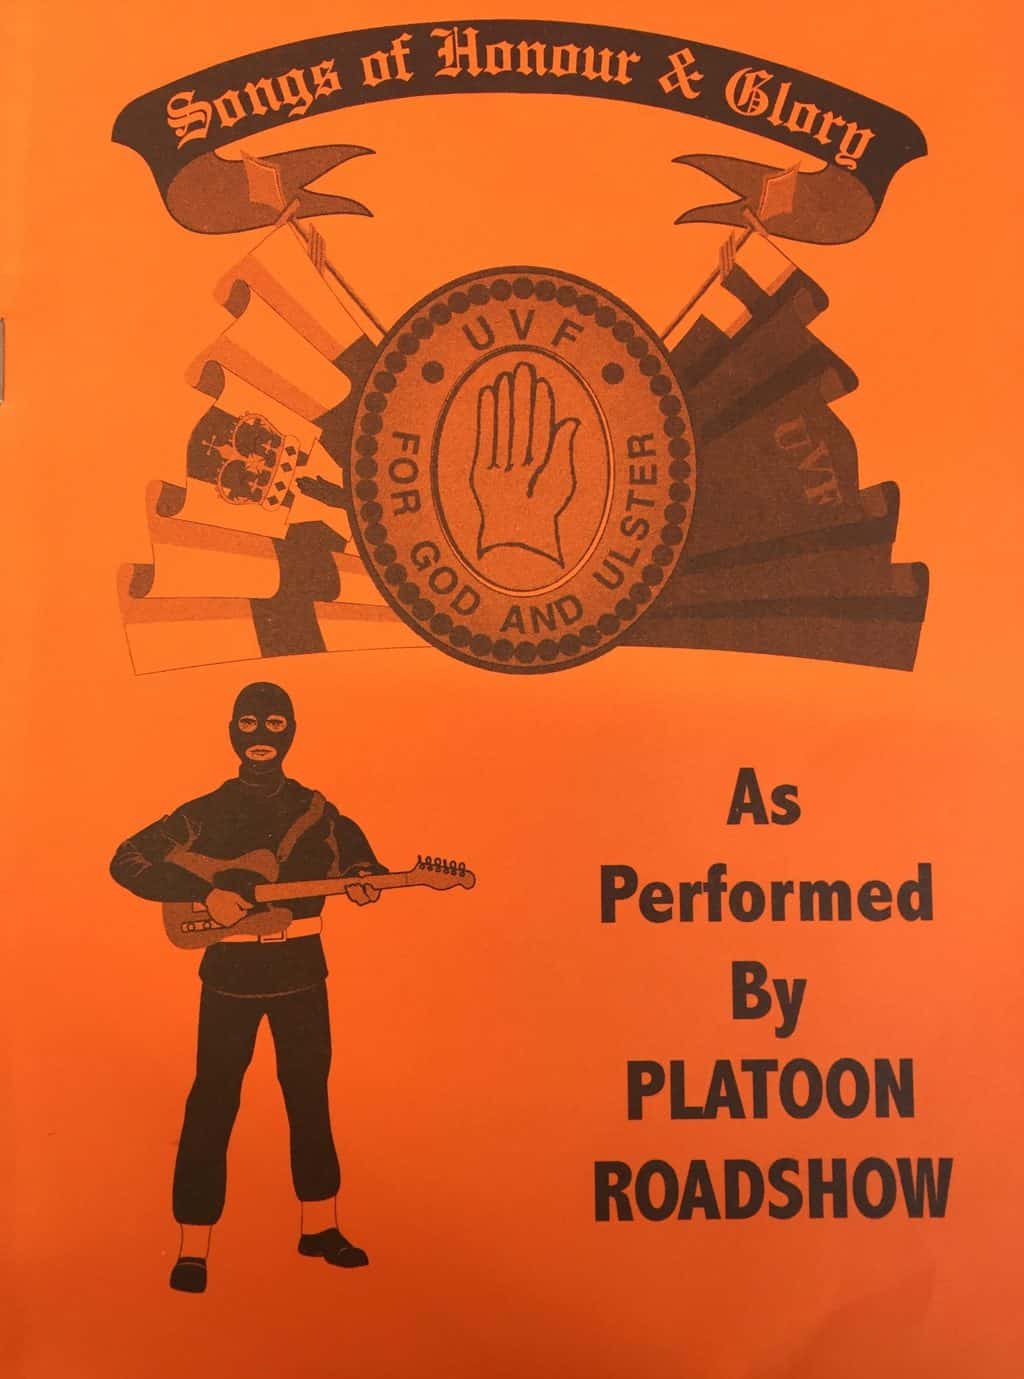 Song of honor and glory - as performed by Platoon Roadshow